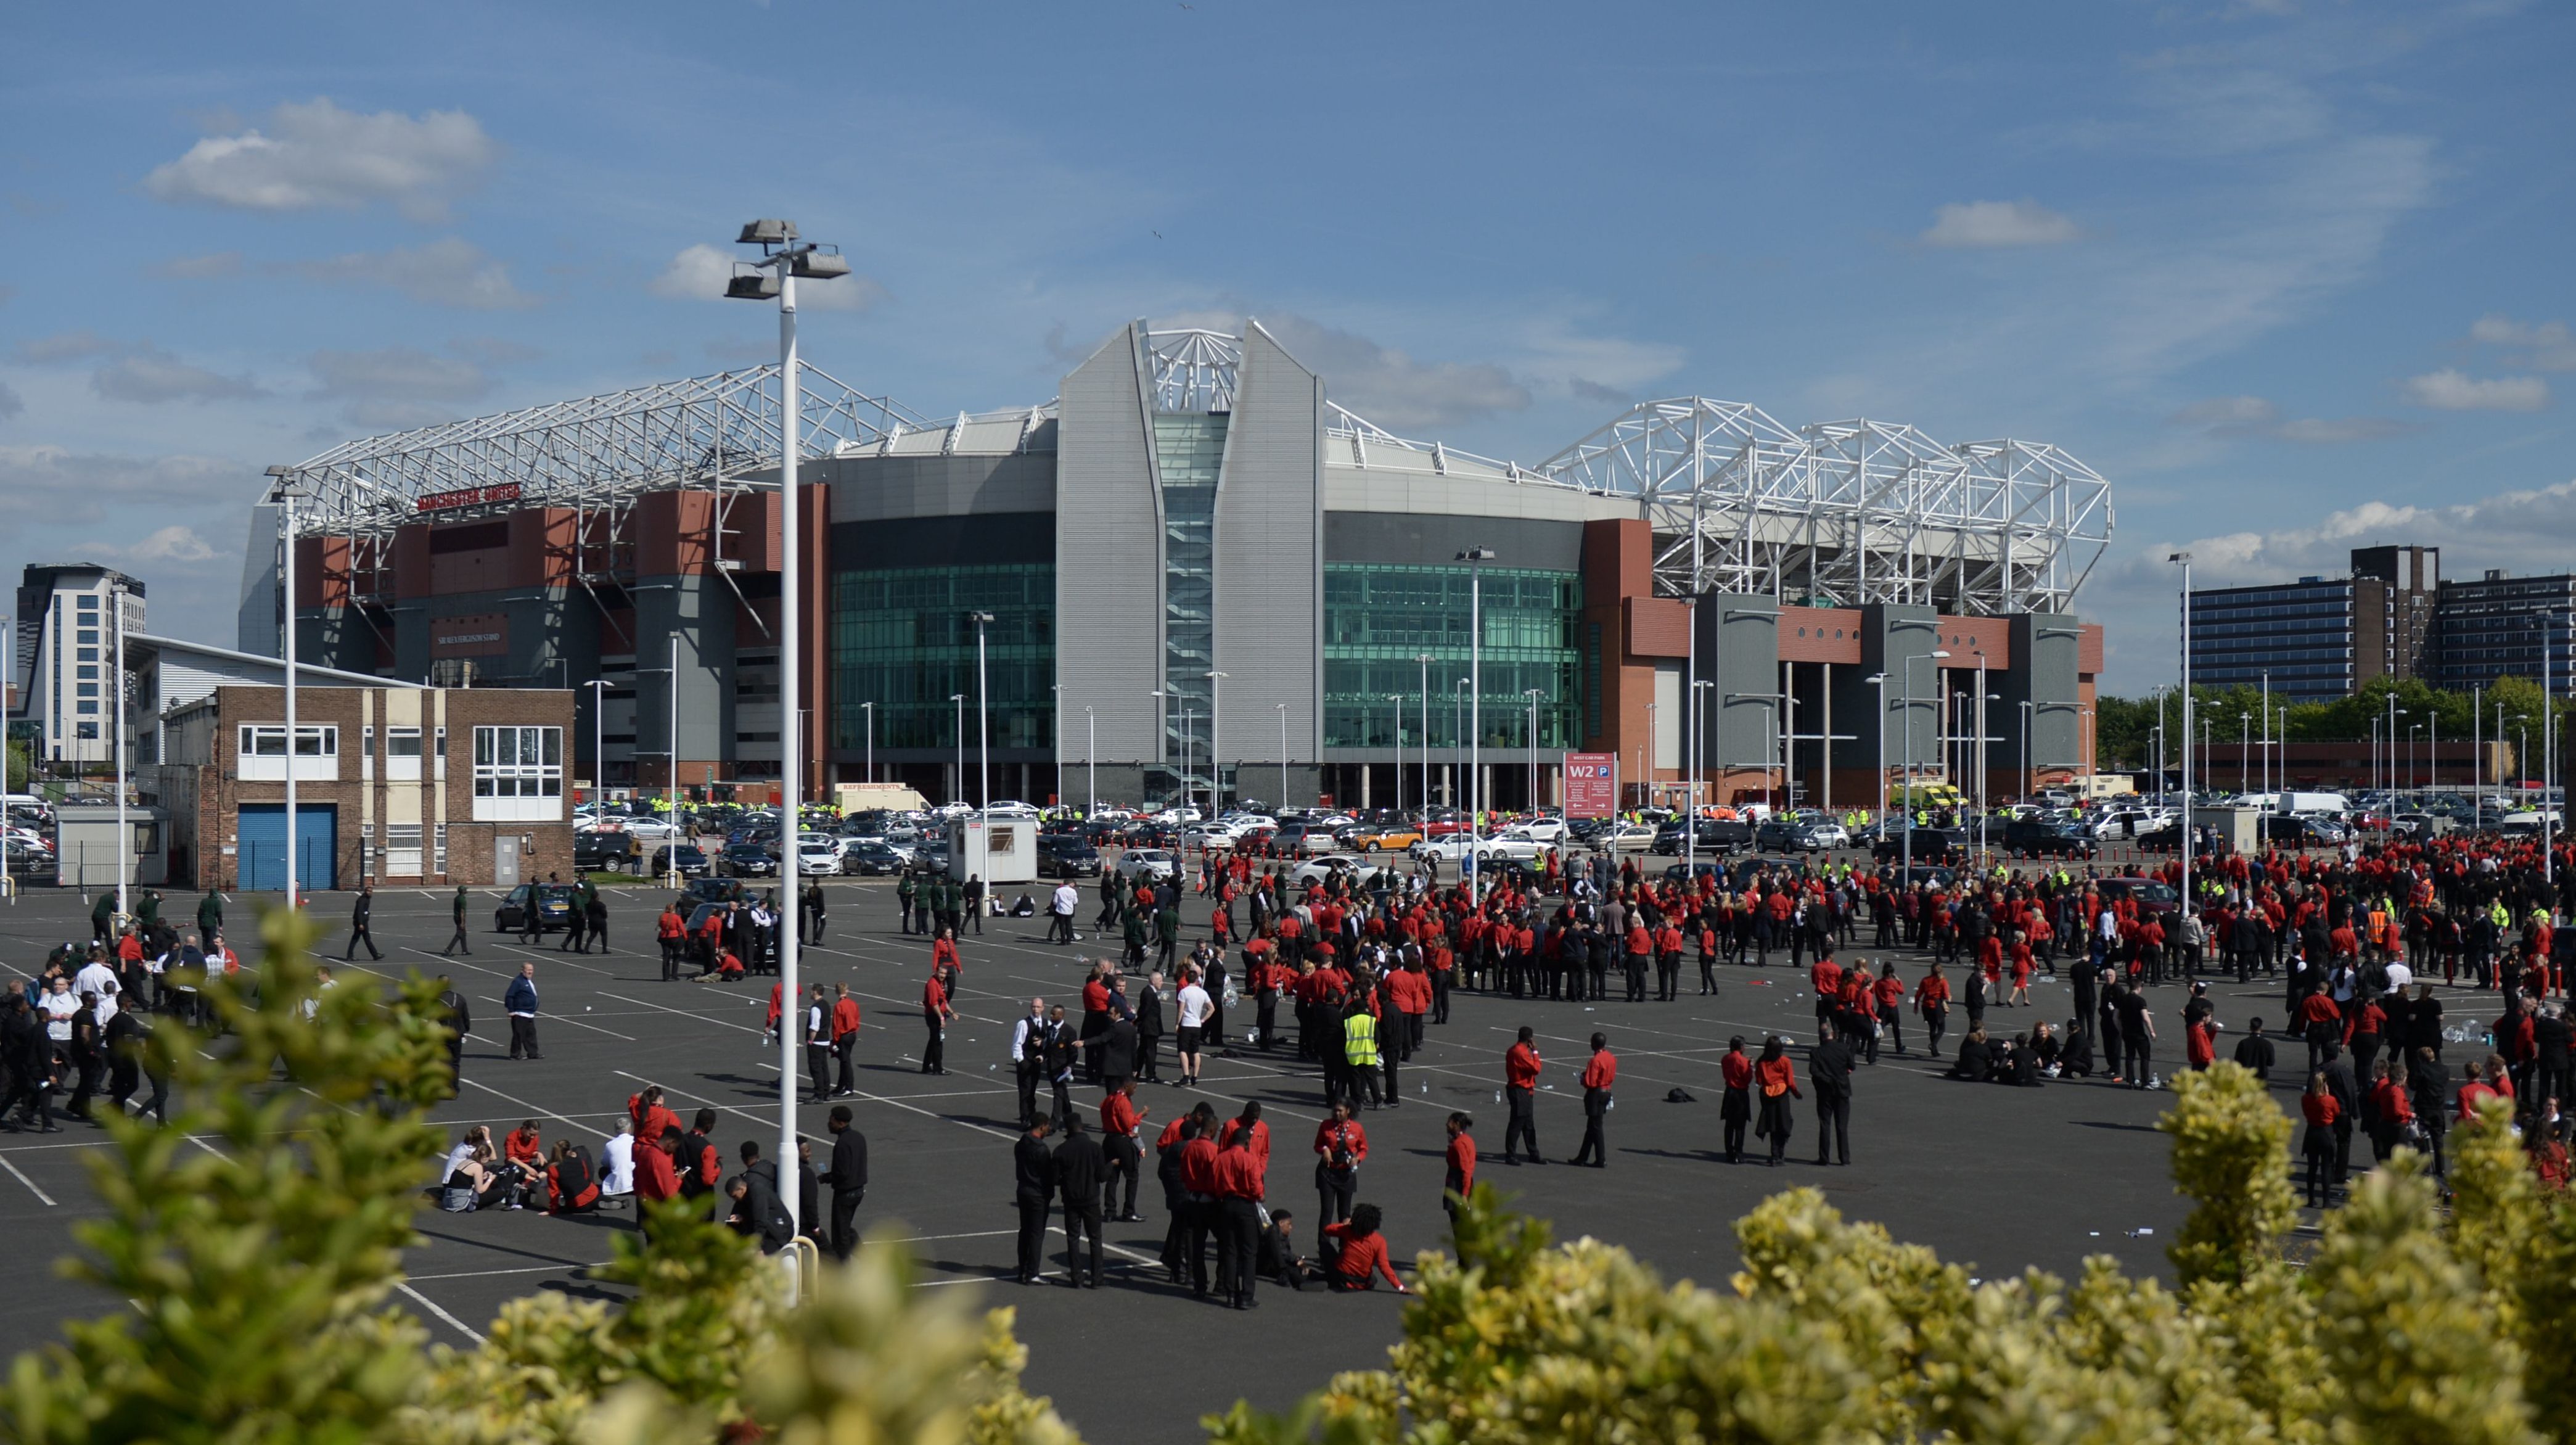 Old Trafford stadium workers stand in a car park outside the stadium in Manchester, north west England, on May 15, 2016, after the English Premier League football match between Manchester United and Bournemouth was abandoned. (Getty)